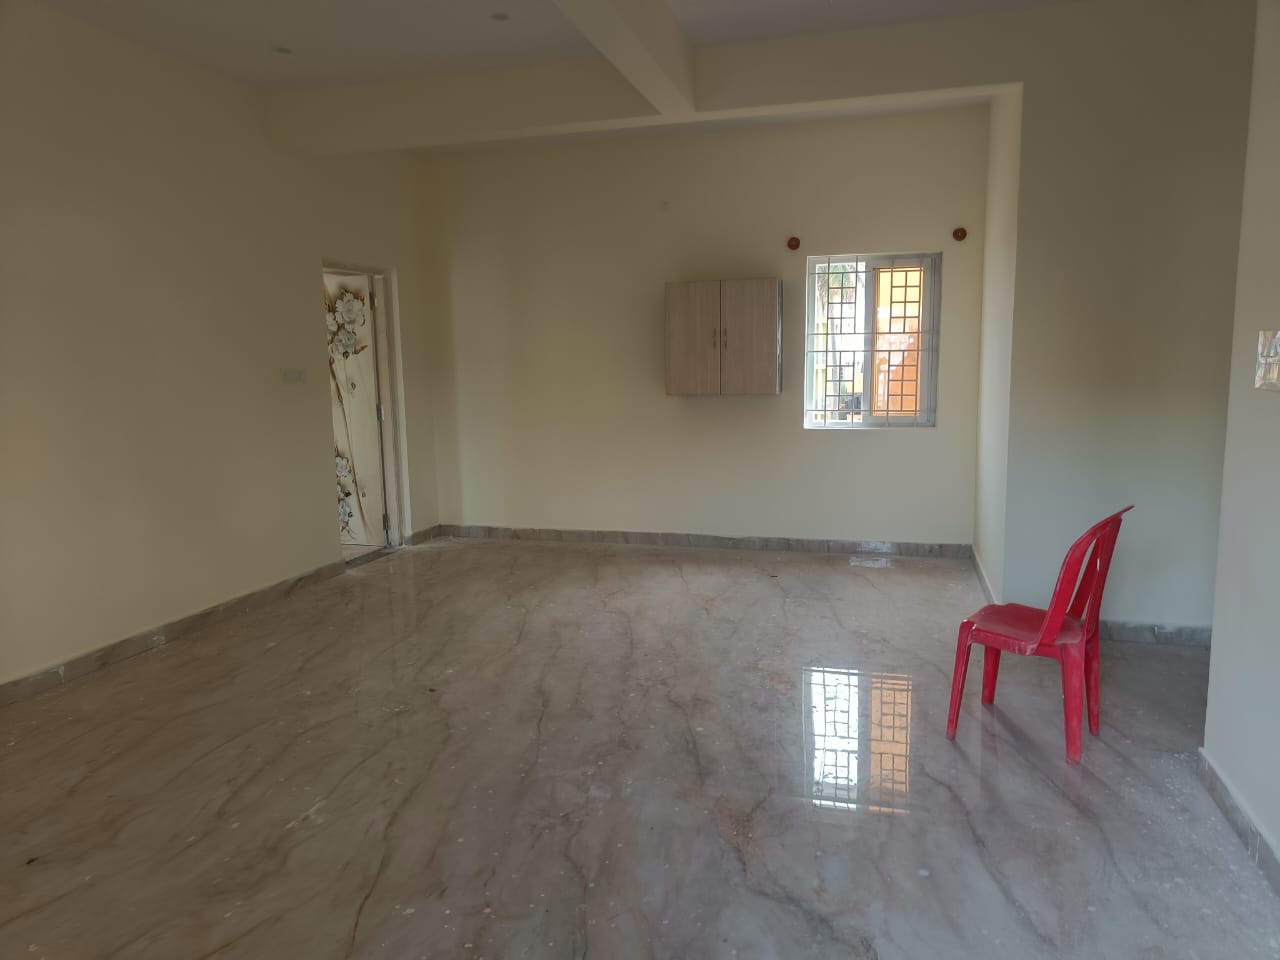 2 BHK Independent House for Lease Only at JAML2 - 5083-27lakh in Suddagunte Palya